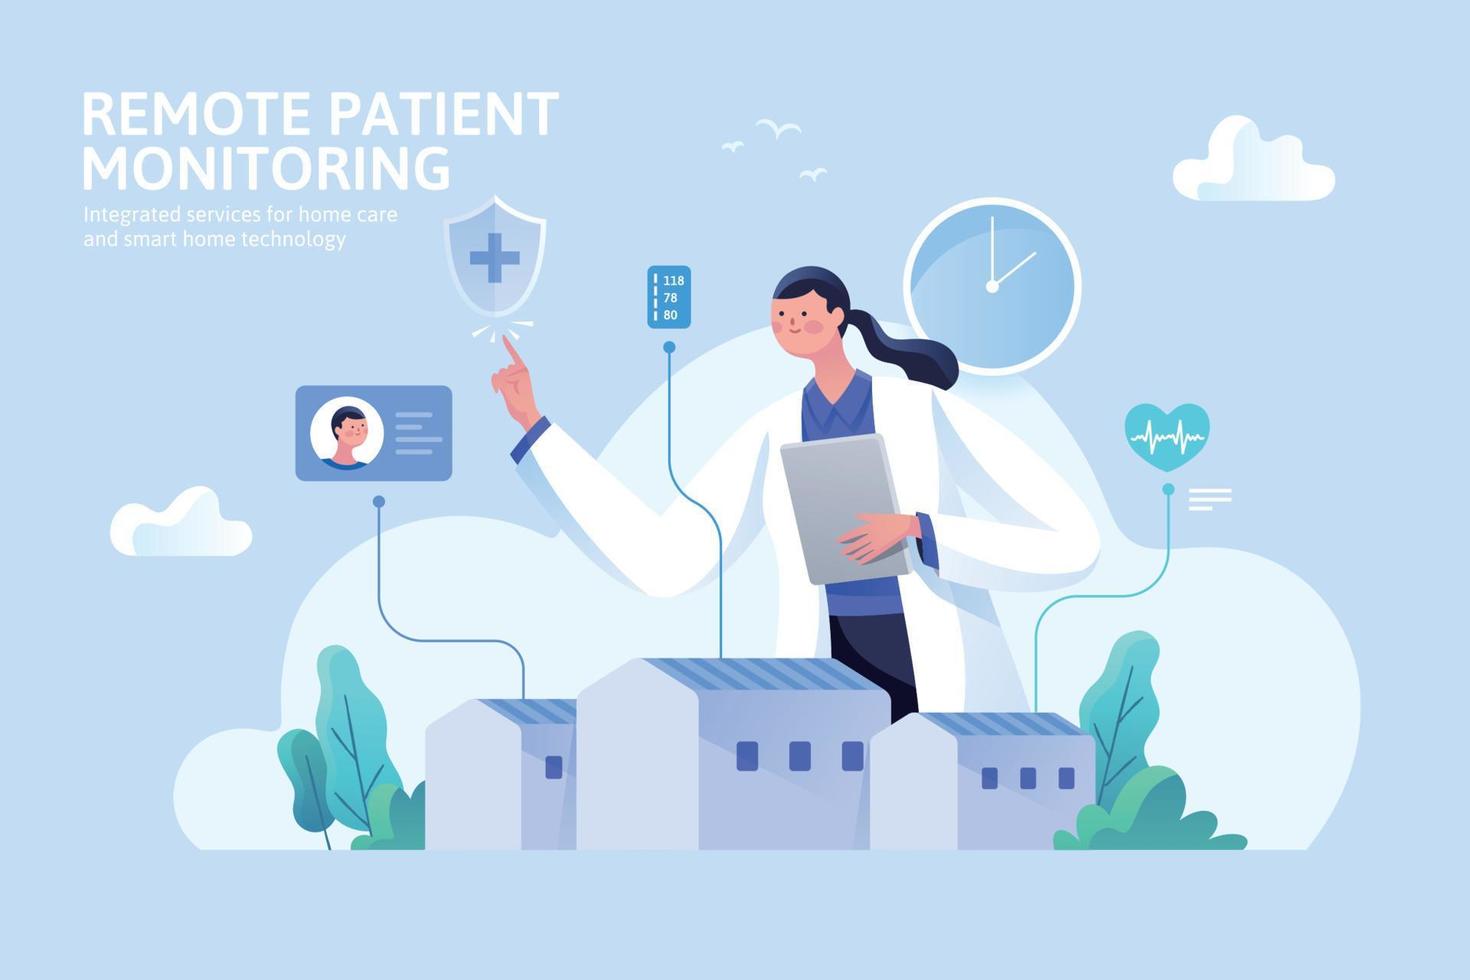 Doctor using technology to monitor patient's health condition remotely, concept of telehealth, remote patient monitoring vector